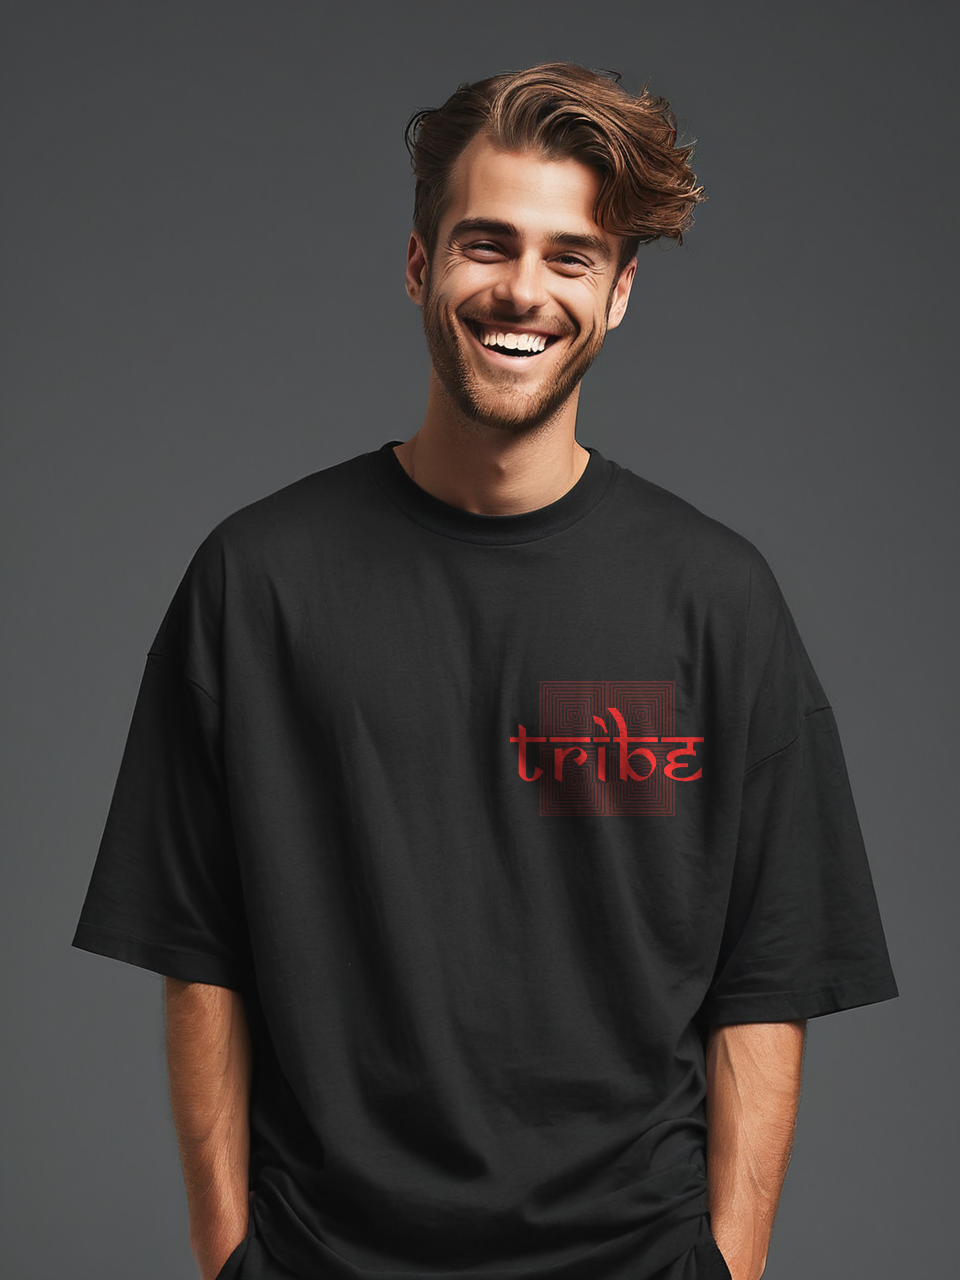 Tribe oversize T-shirt, front side